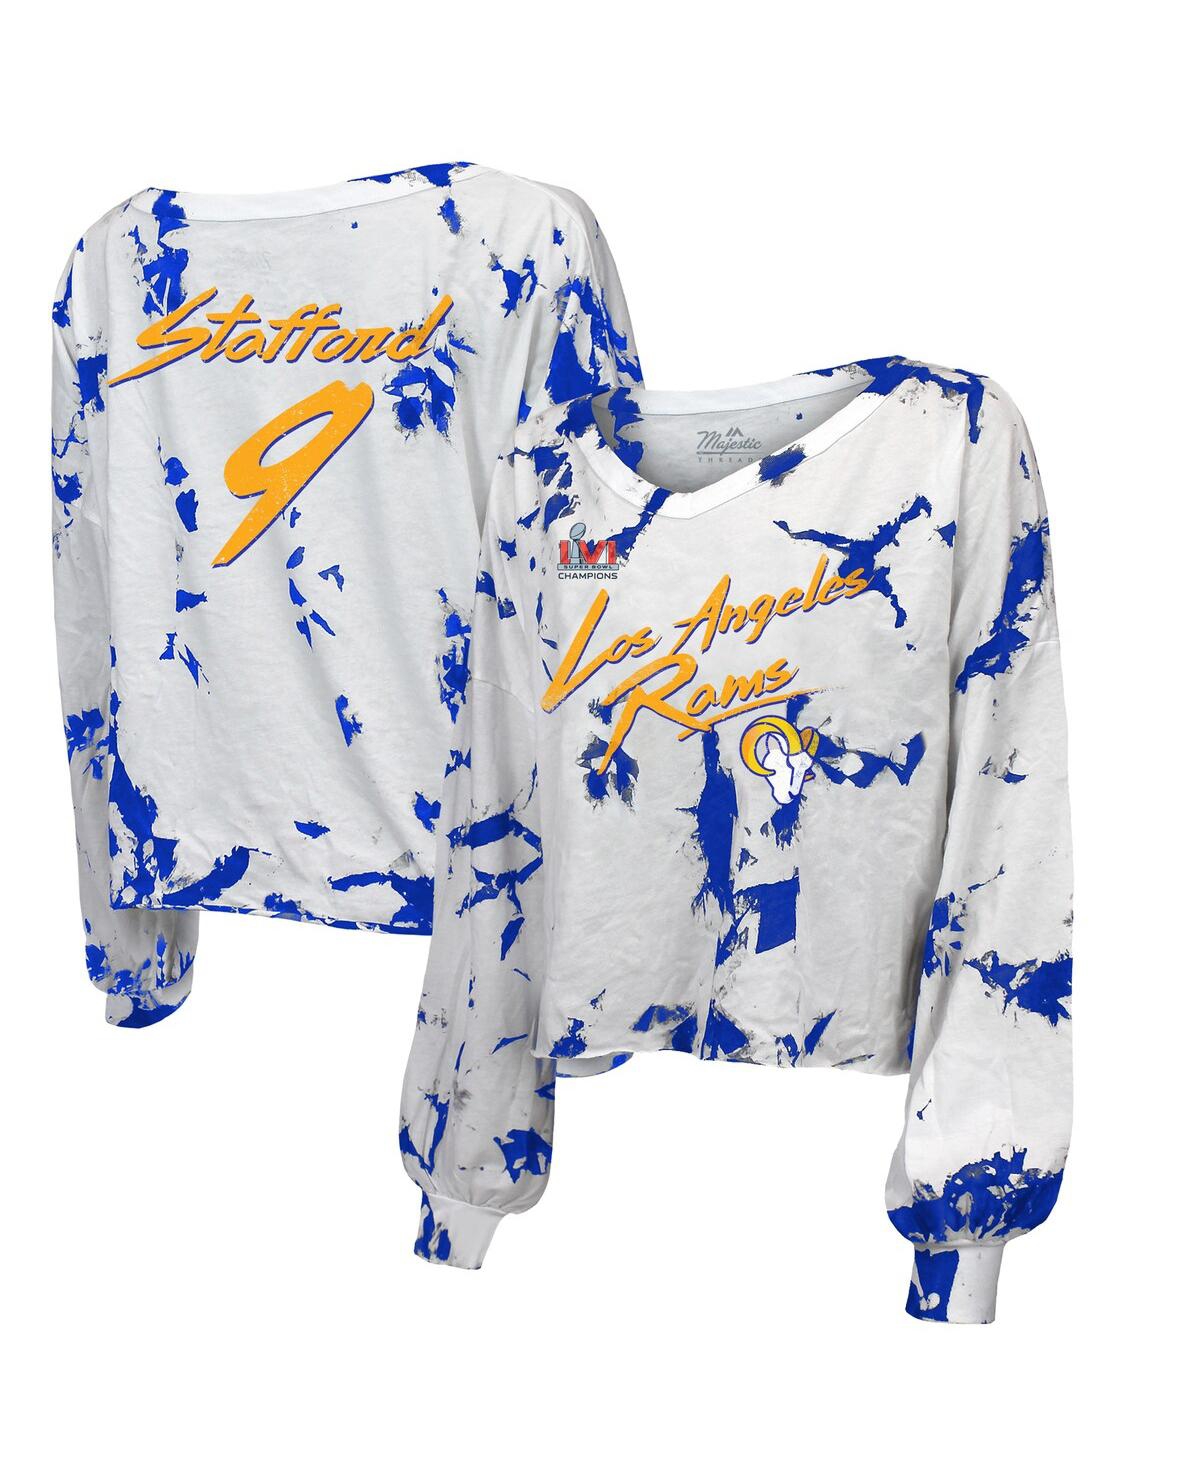 Women's Majestic Threads Matthew Stafford Royal, White Los Angeles Rams Super Bowl Lvi Champions Off-Shoulder Tie-Dye Name Number Long Sleeve V-Neck T